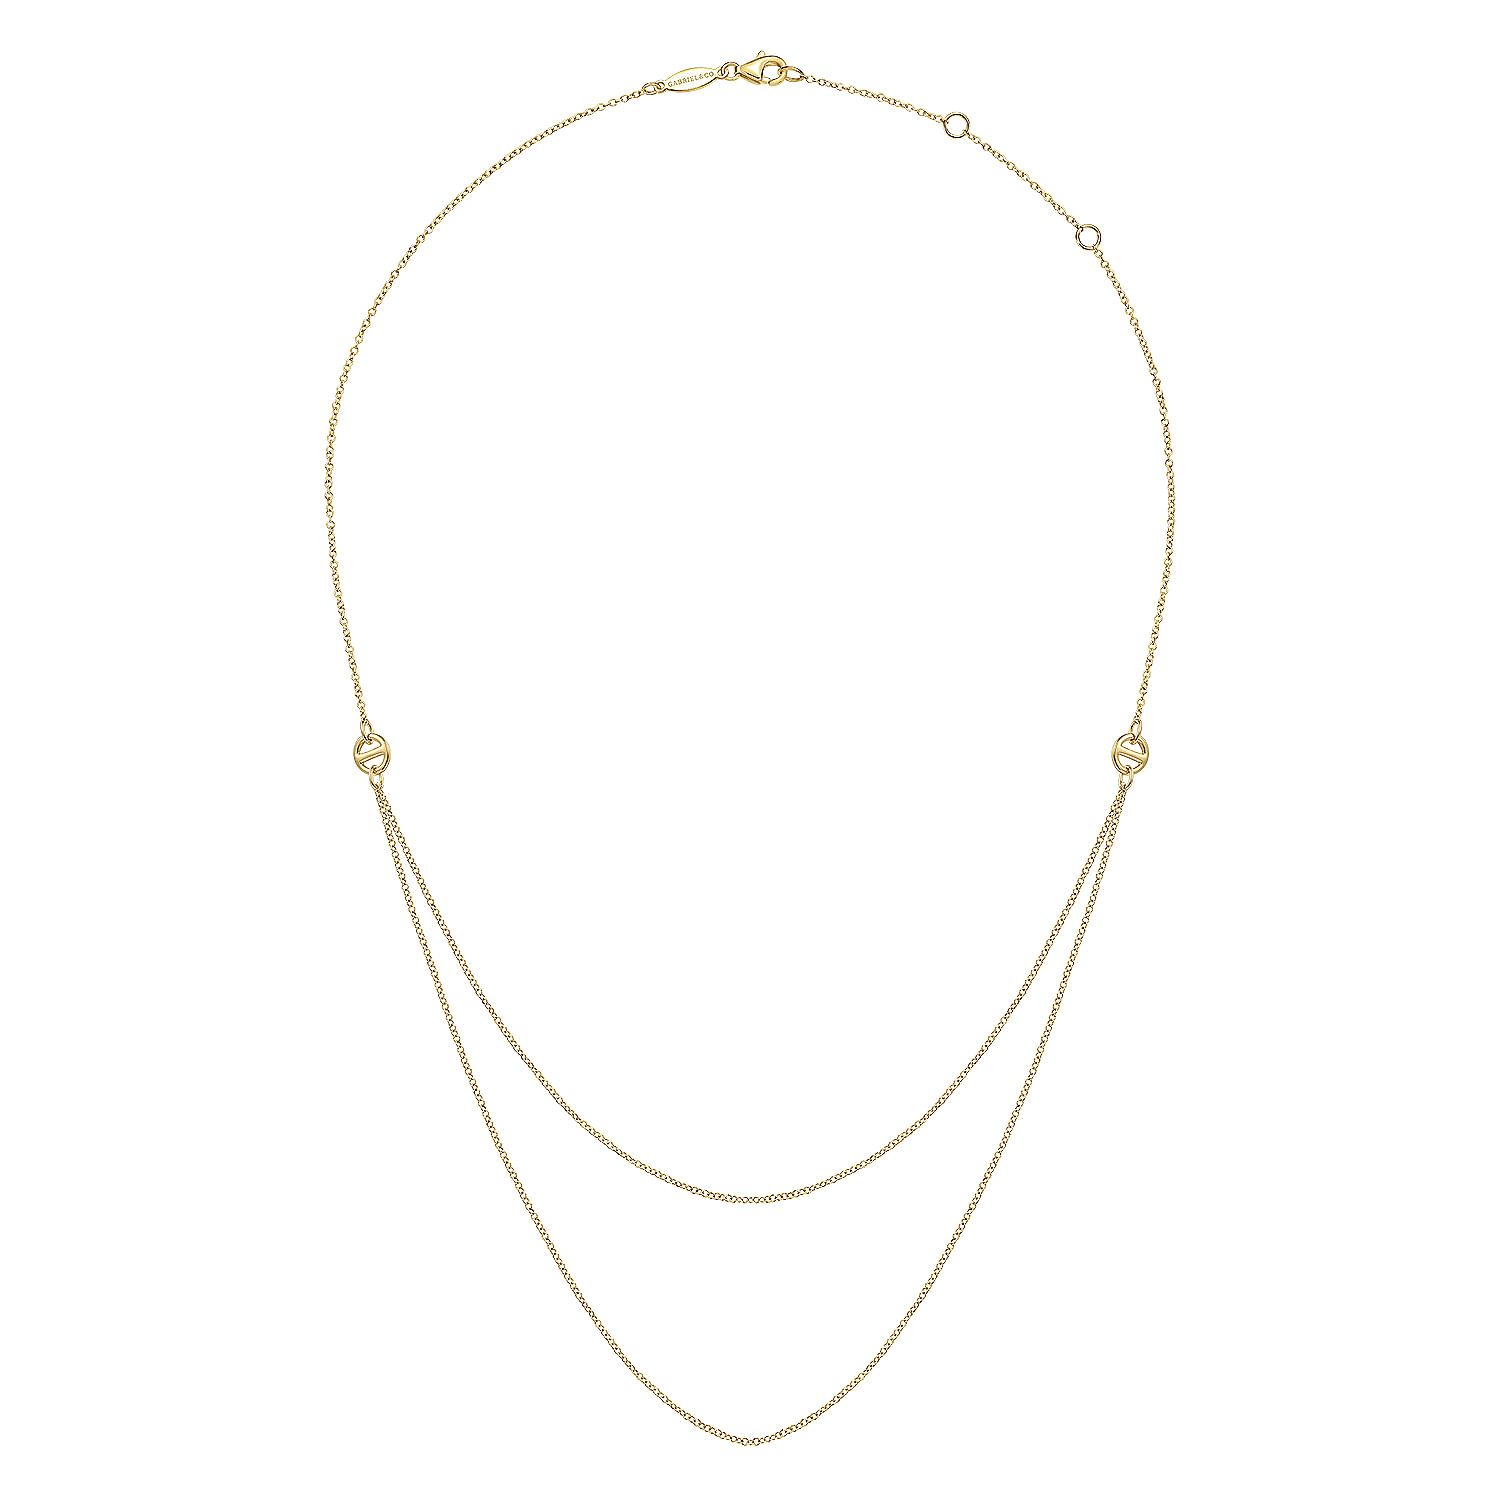 20 inch 14K Yellow Gold Chain Swag Necklace - Shot 2